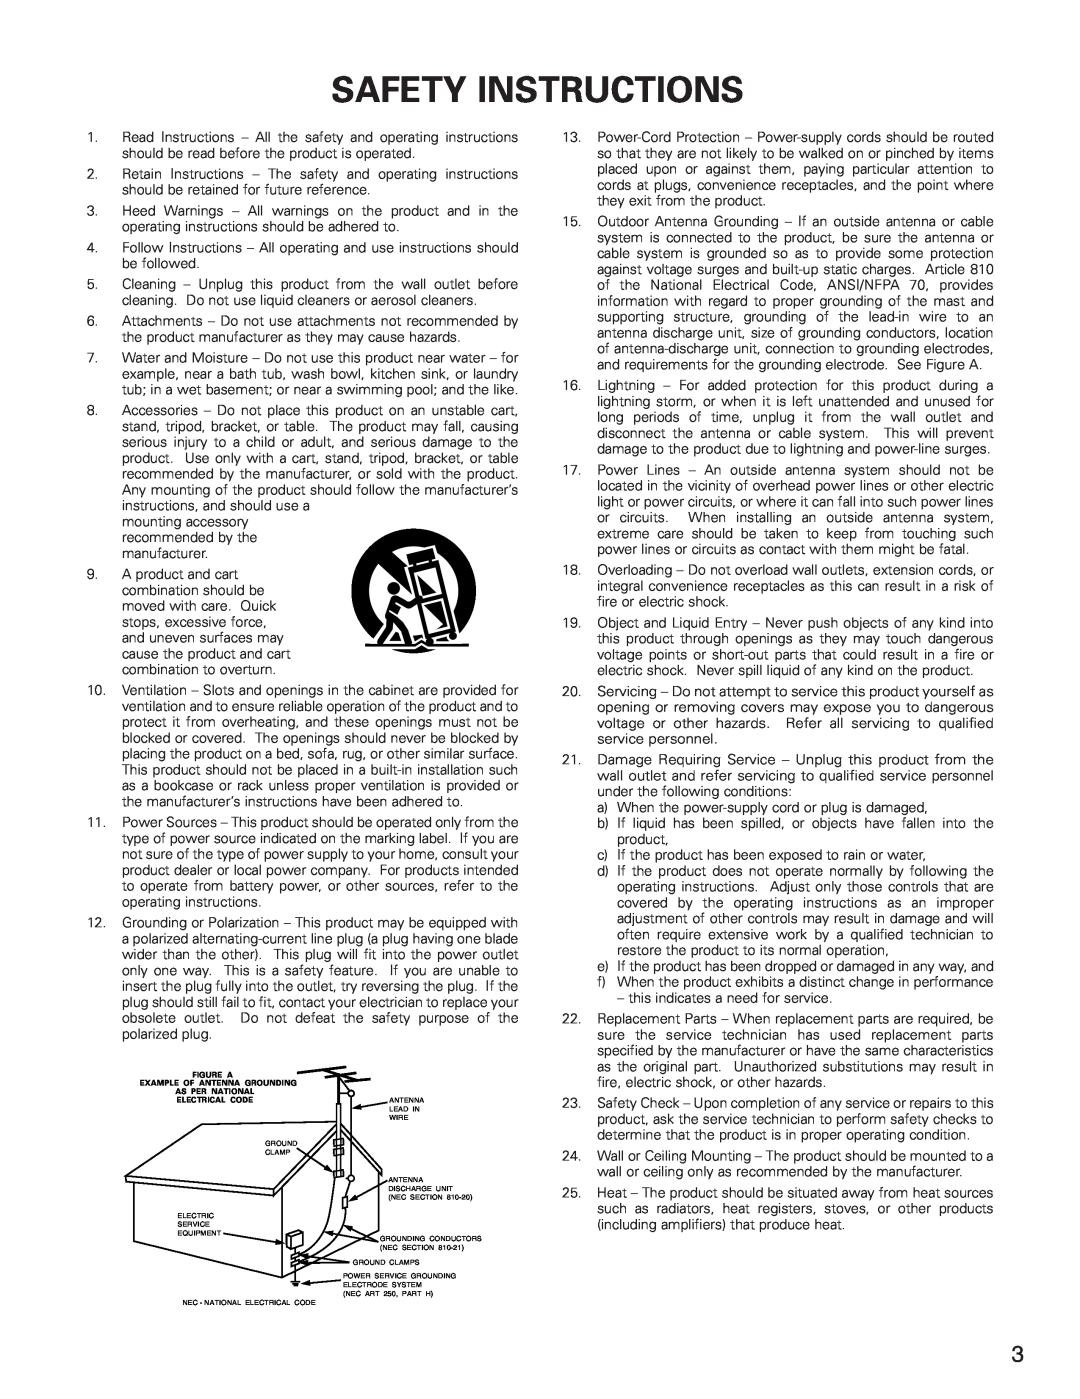 Denon DCM-280 operating instructions Safety Instructions 